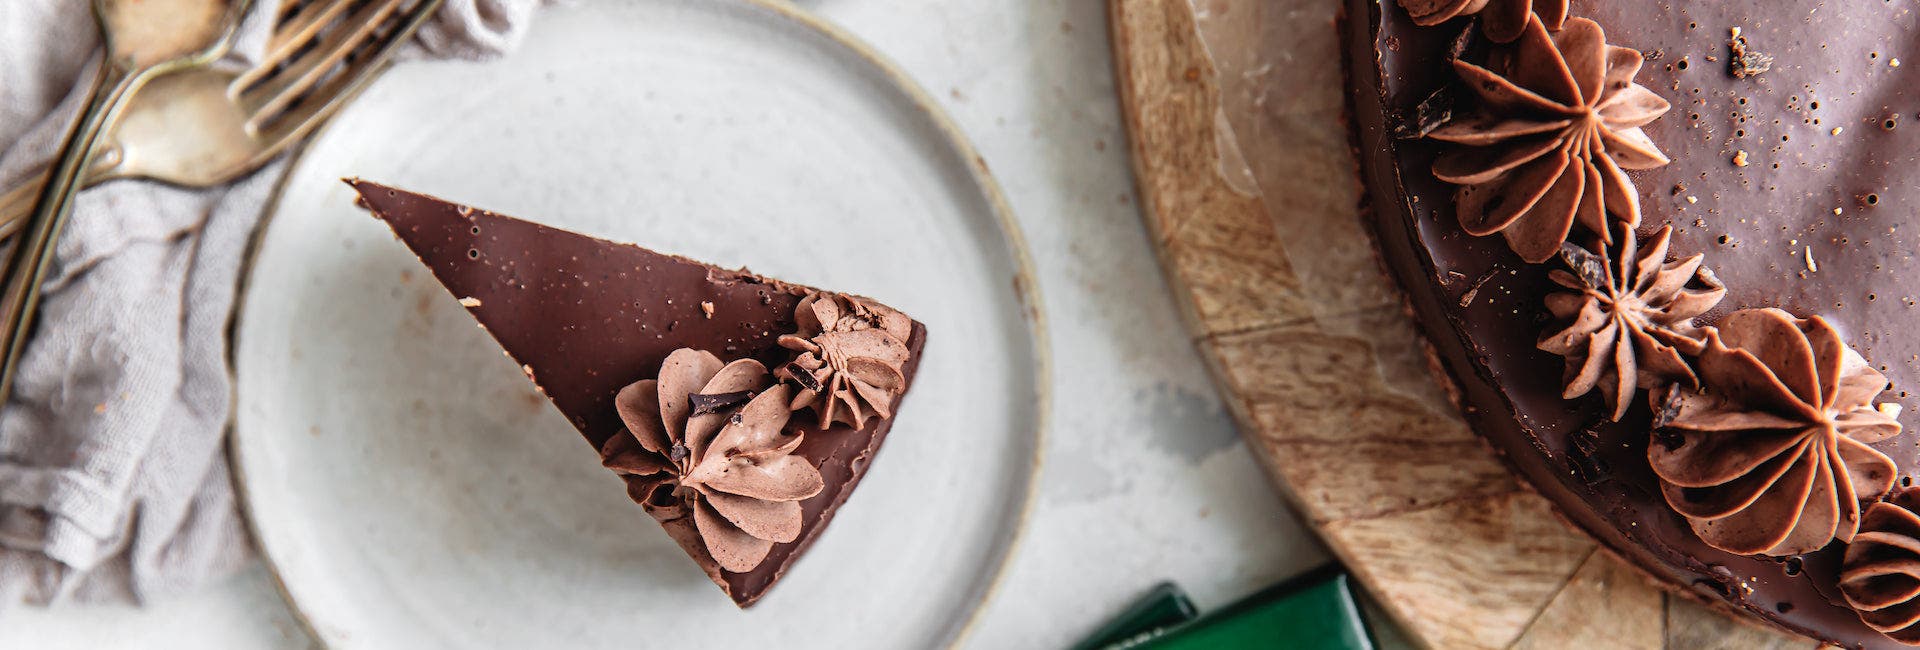 Dairy-free Chocolate Mousse Cake